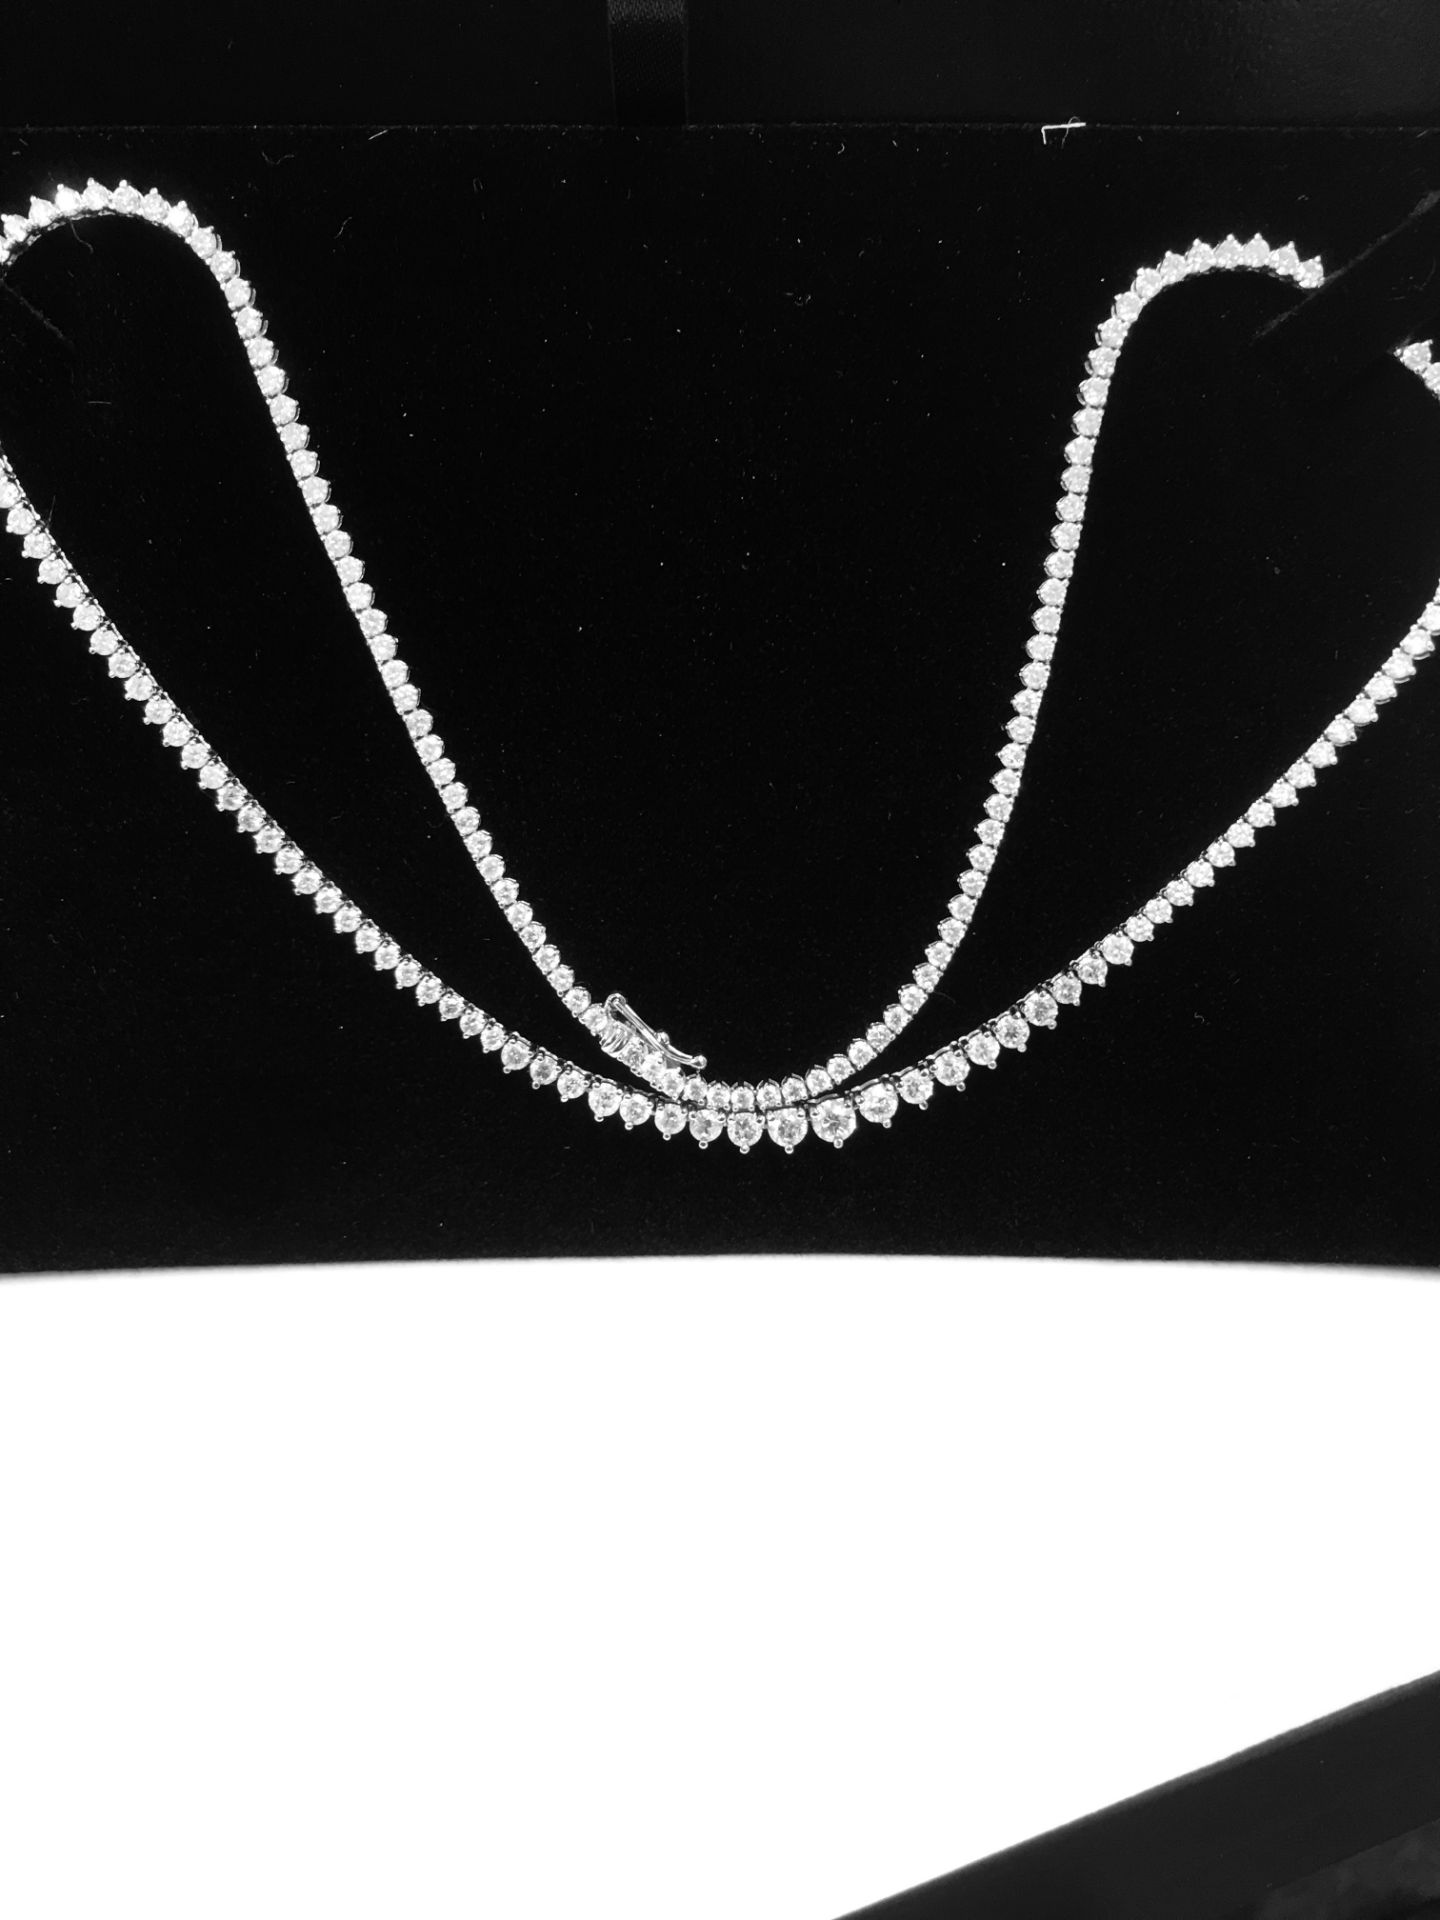 6.50ct Diamond tennis style necklace. 3 claw setting. Graduated diamonds, I colour, Si2 clarity - Image 2 of 6